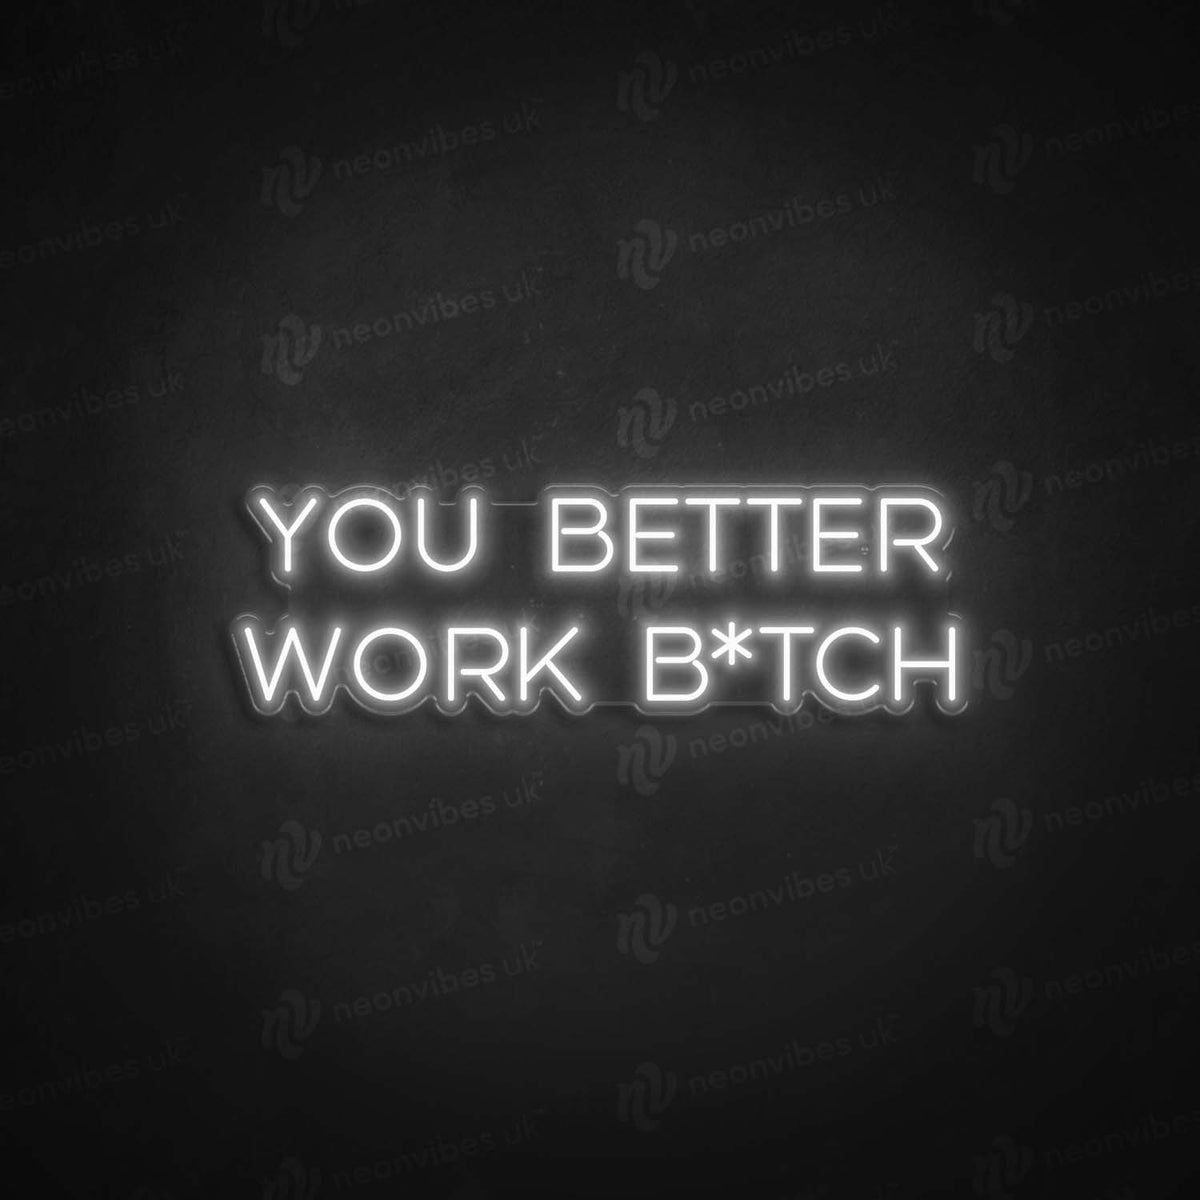 You better work bitch neon sign